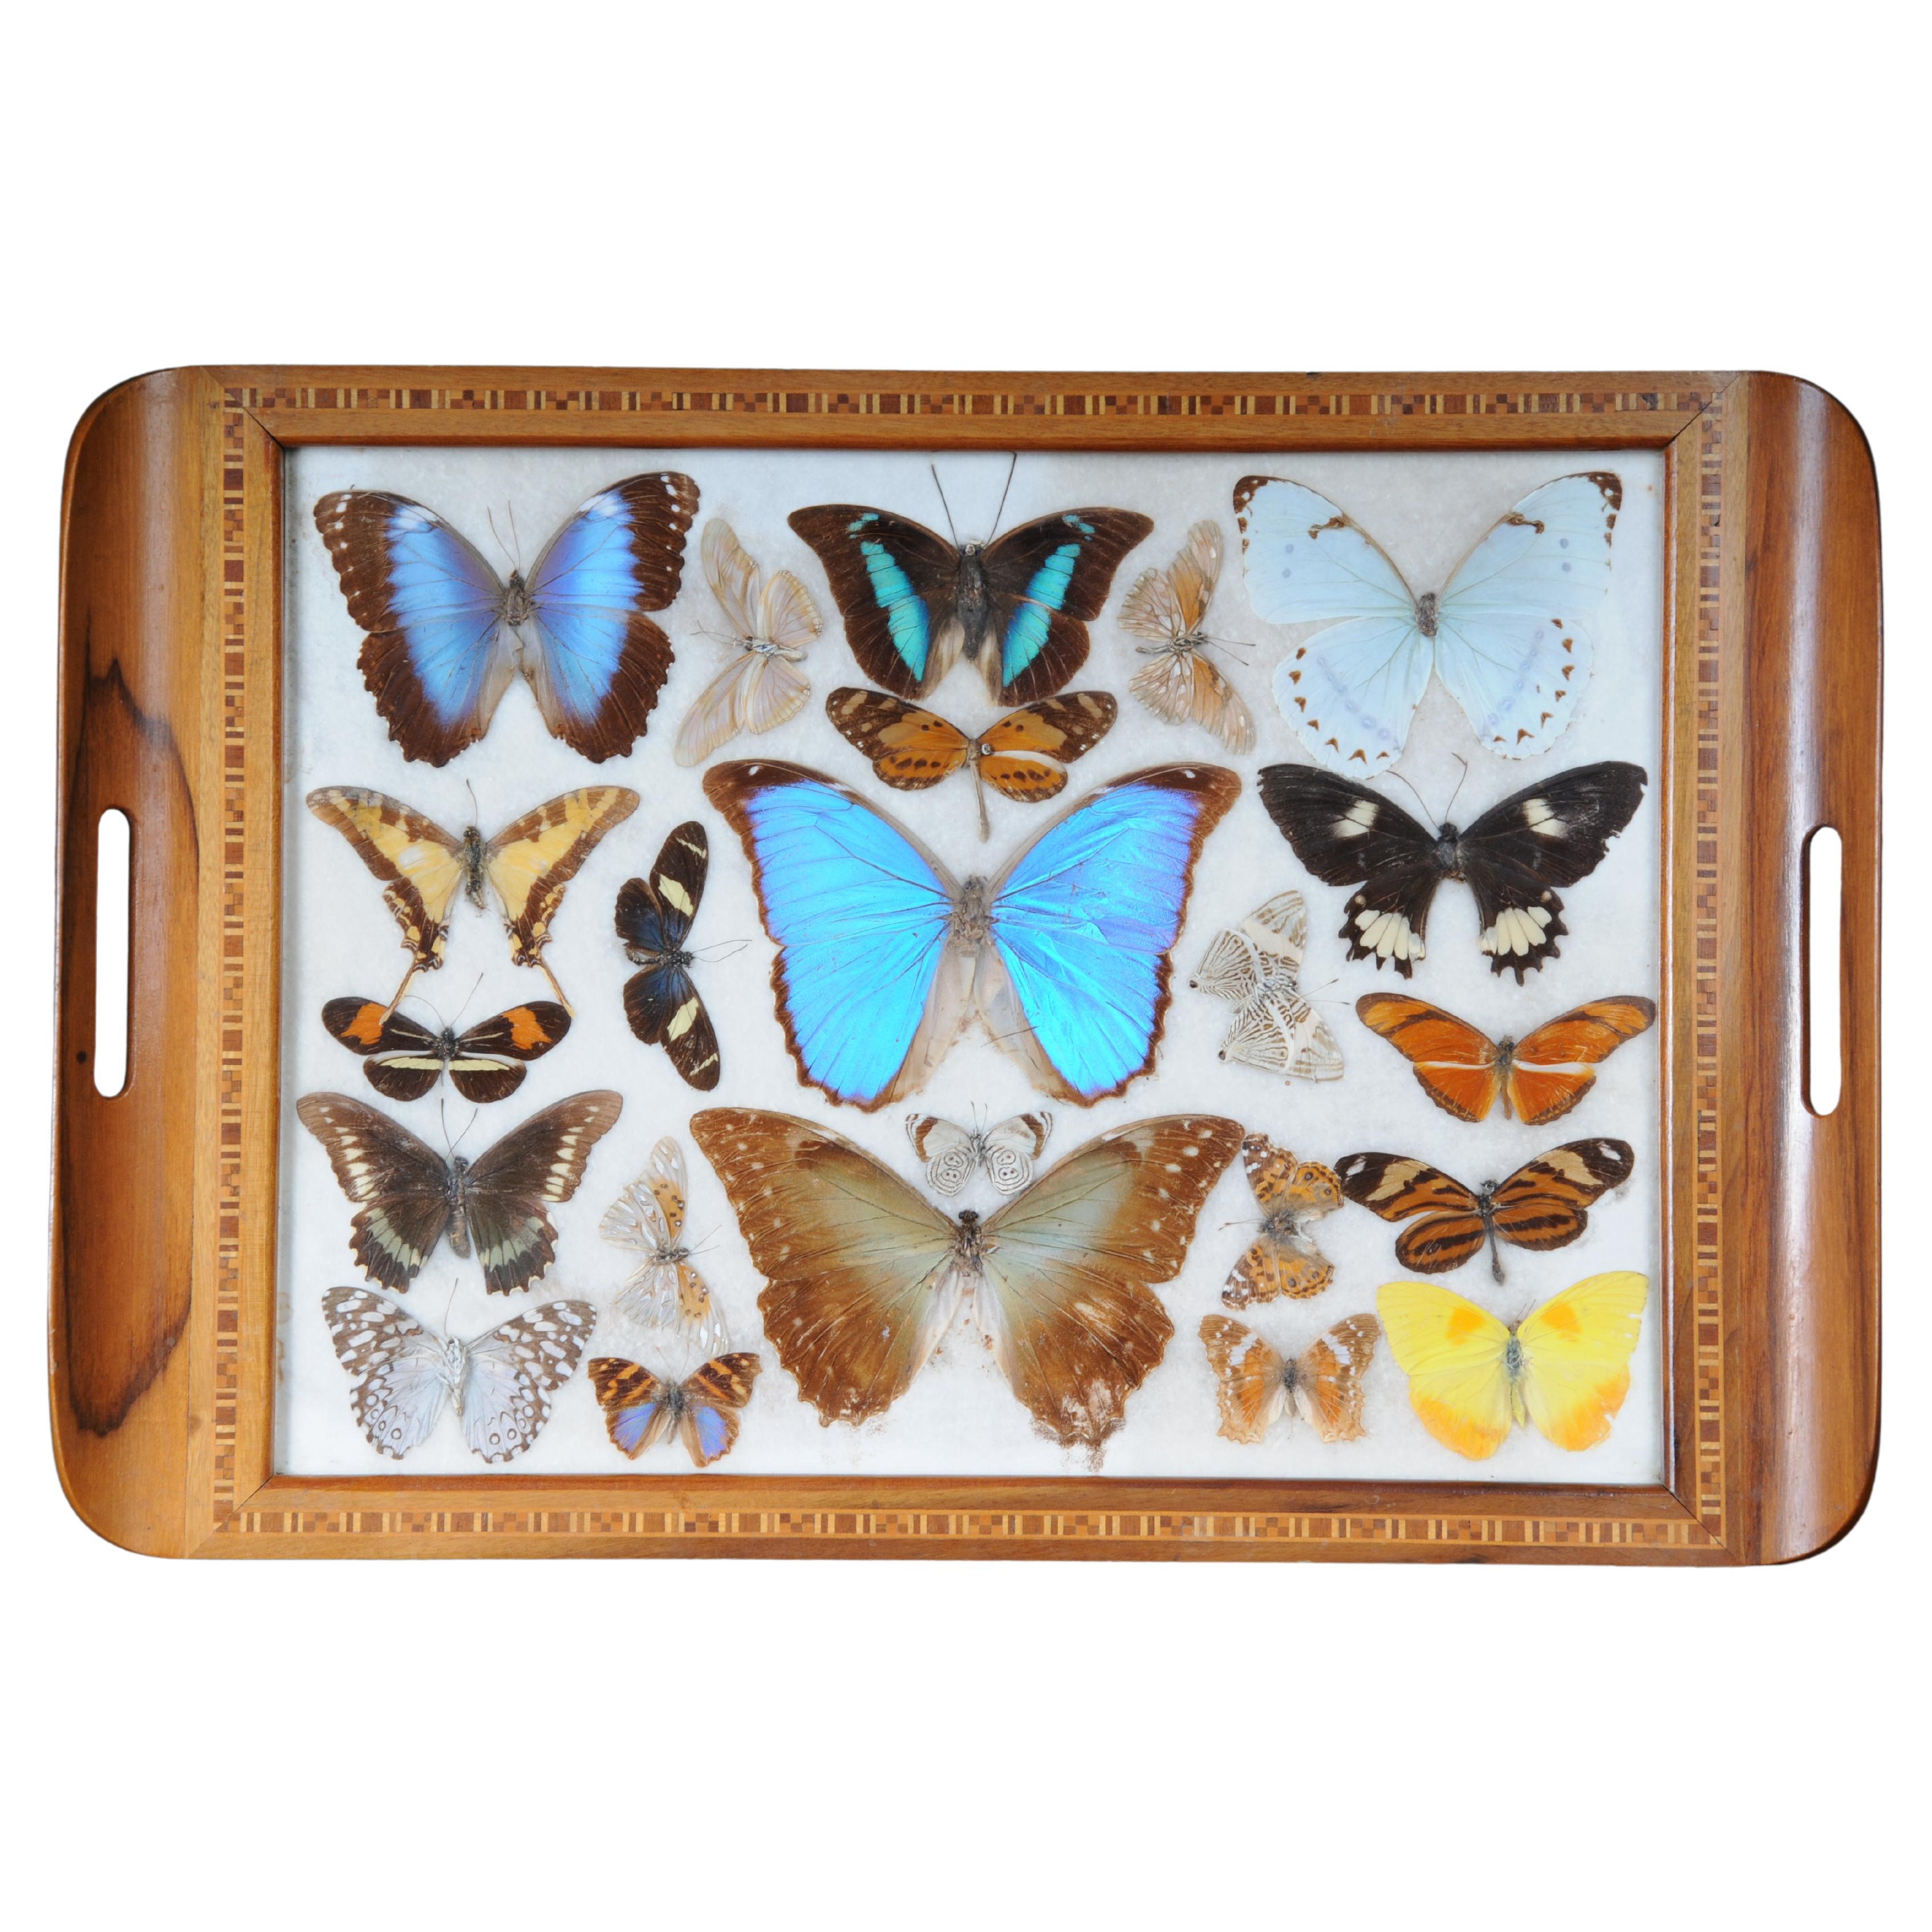 Curious antique tray with real butterfly specimens. Very rare